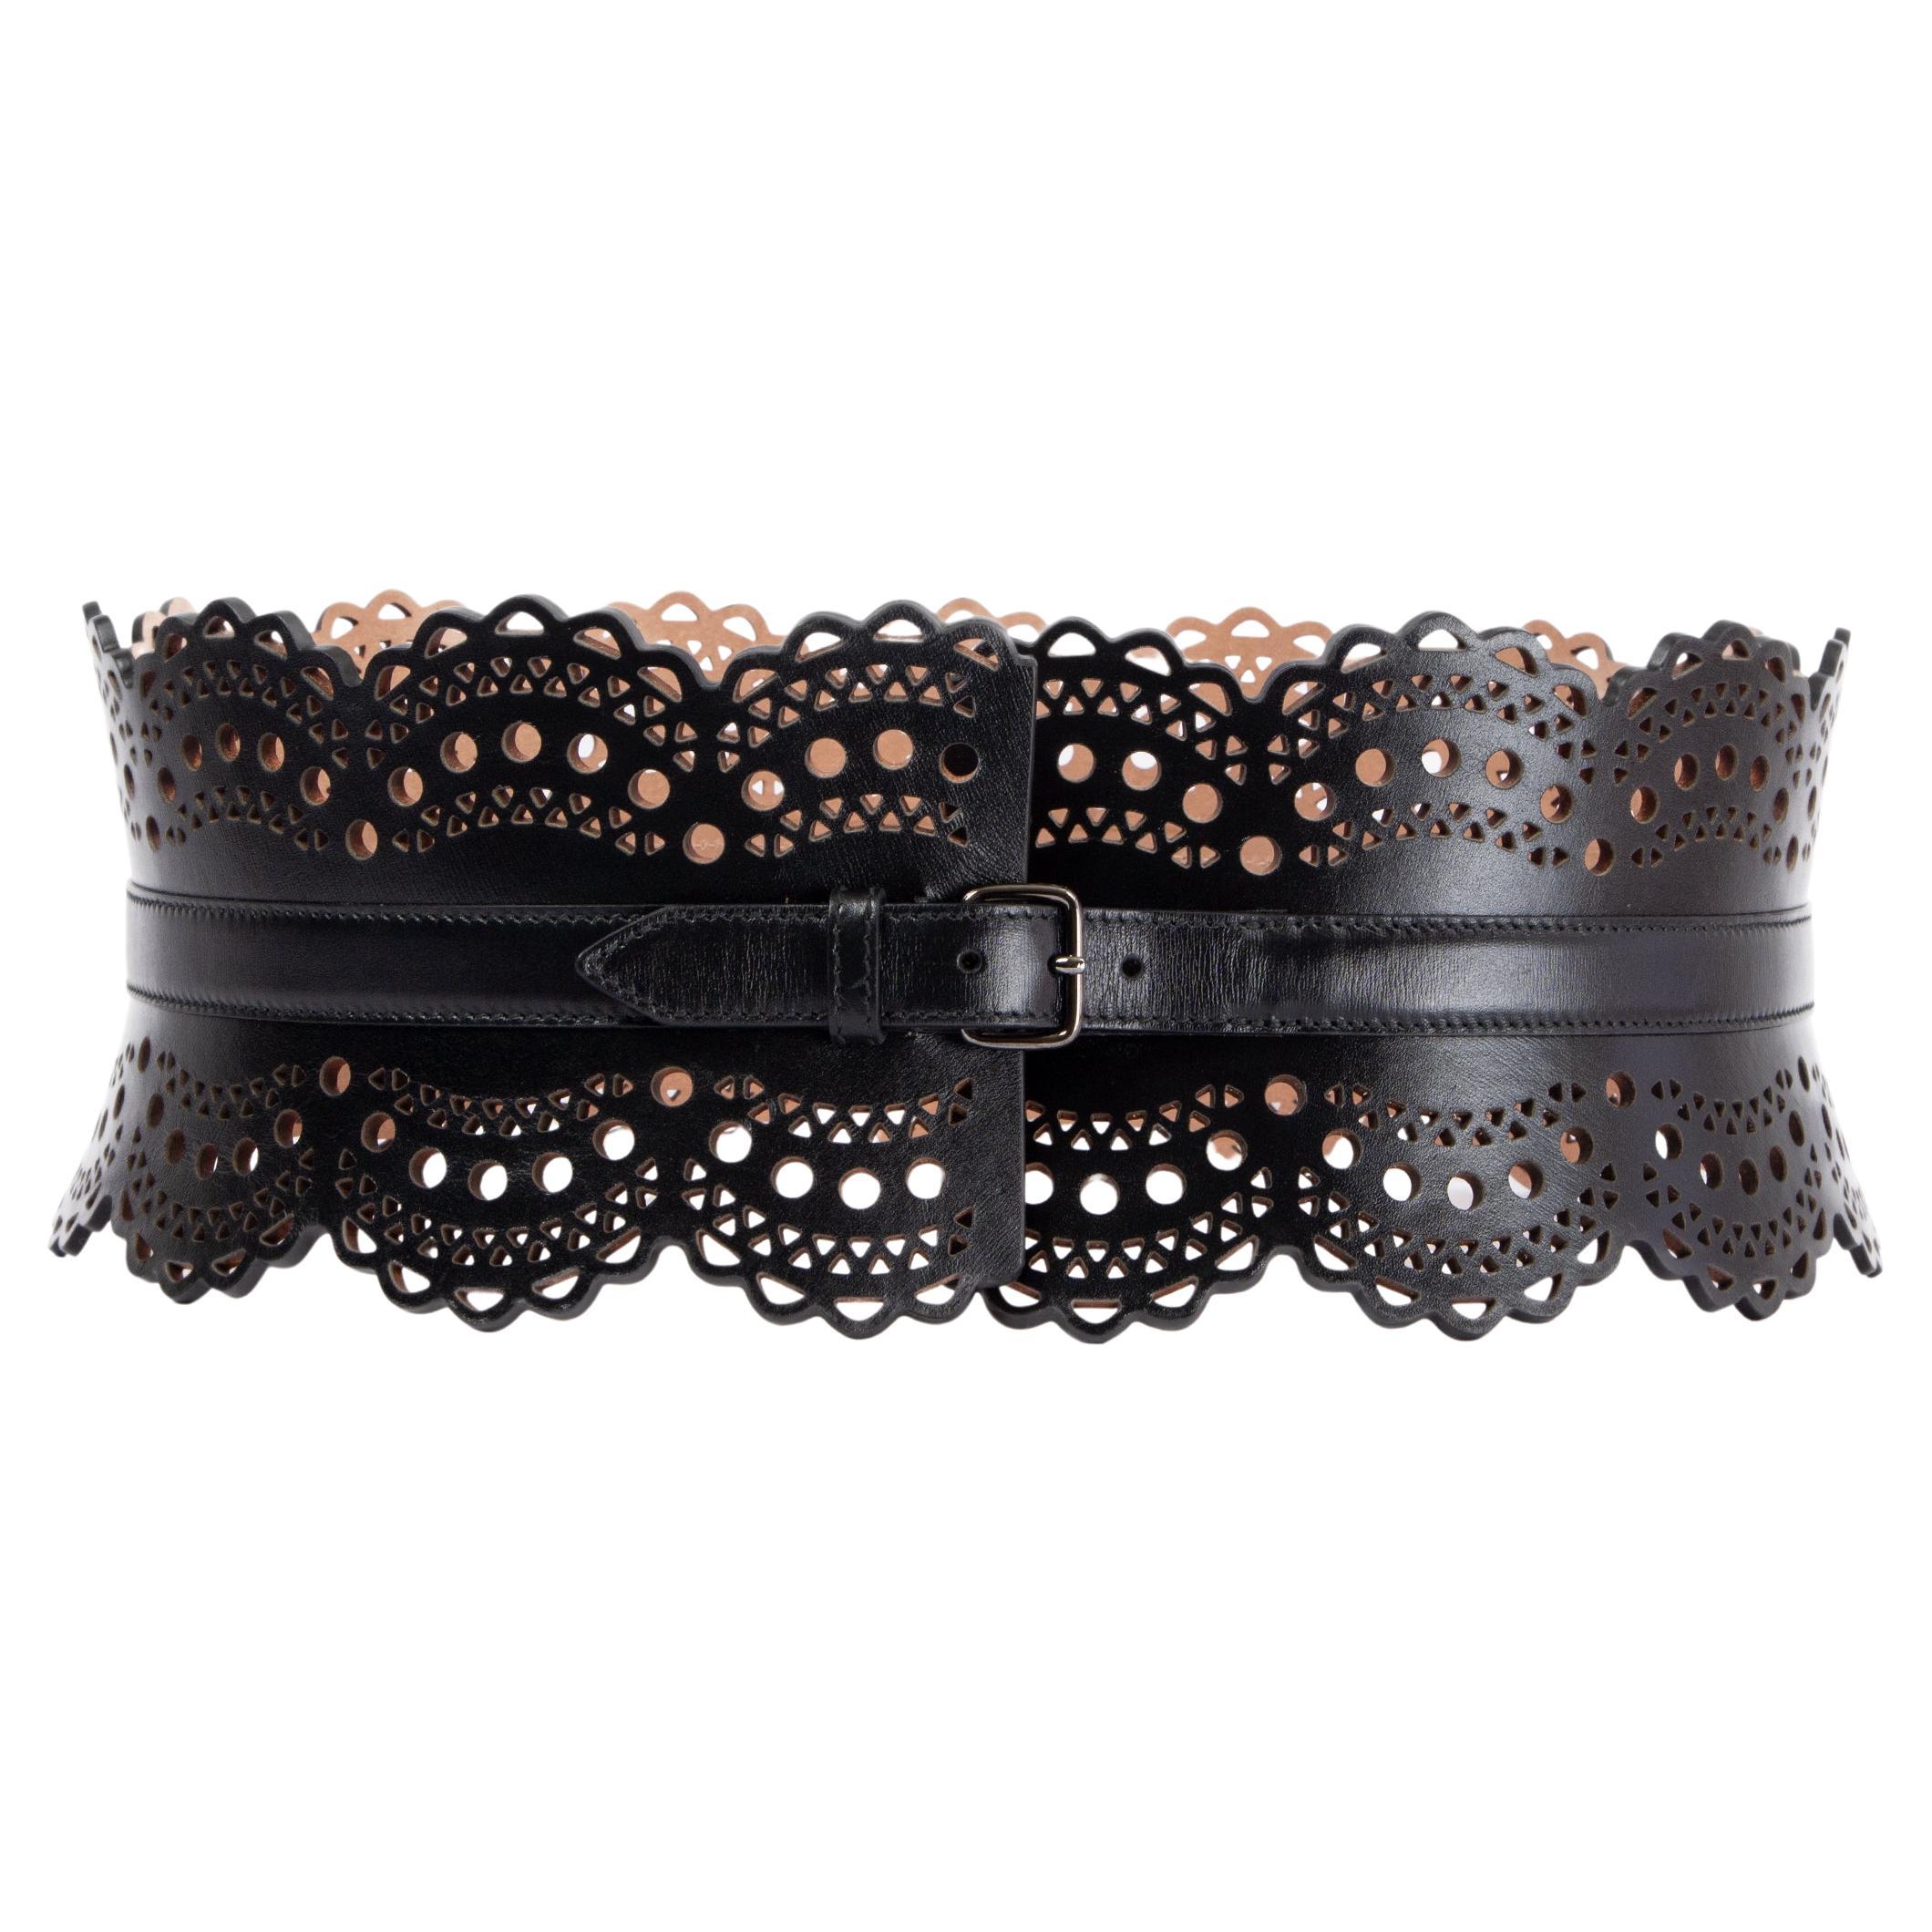 ALAIA black leather PERFORATED WIDE WAIST CORSET Belt 85 at